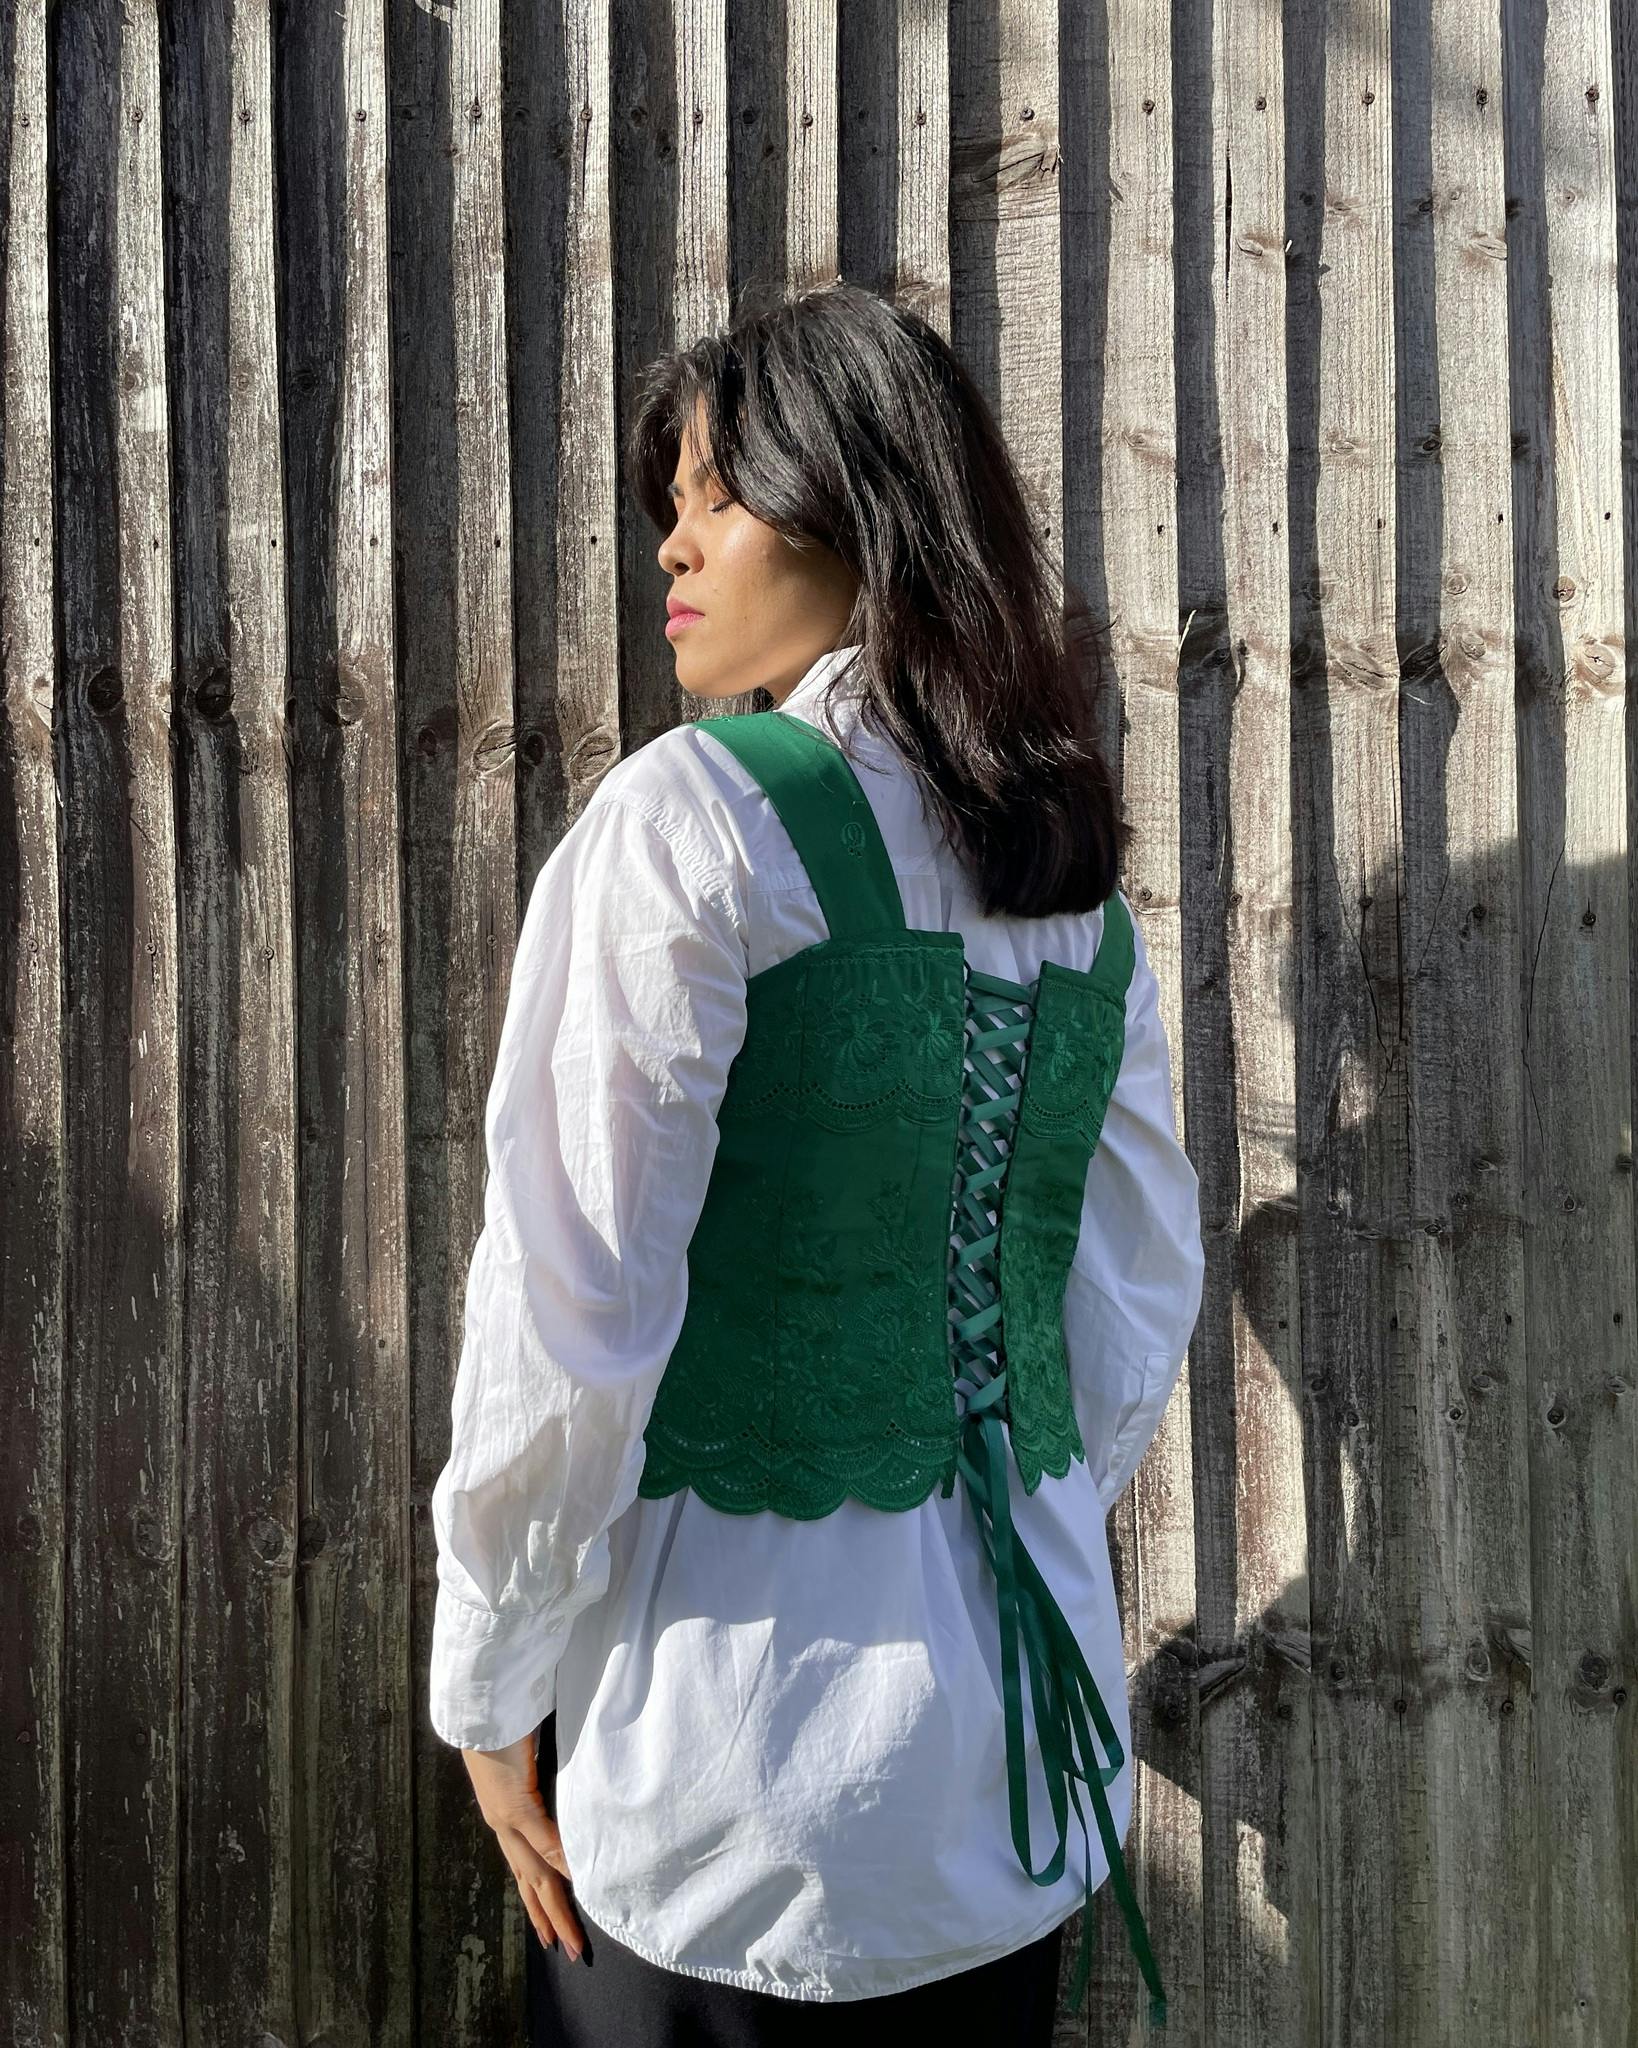 The handmade Nargis corset top features gorgeous traditional embroidered fabric with fully lined cotton fabric and an adjustable lace-up back where the name Nargis is inspired by the spring flower.